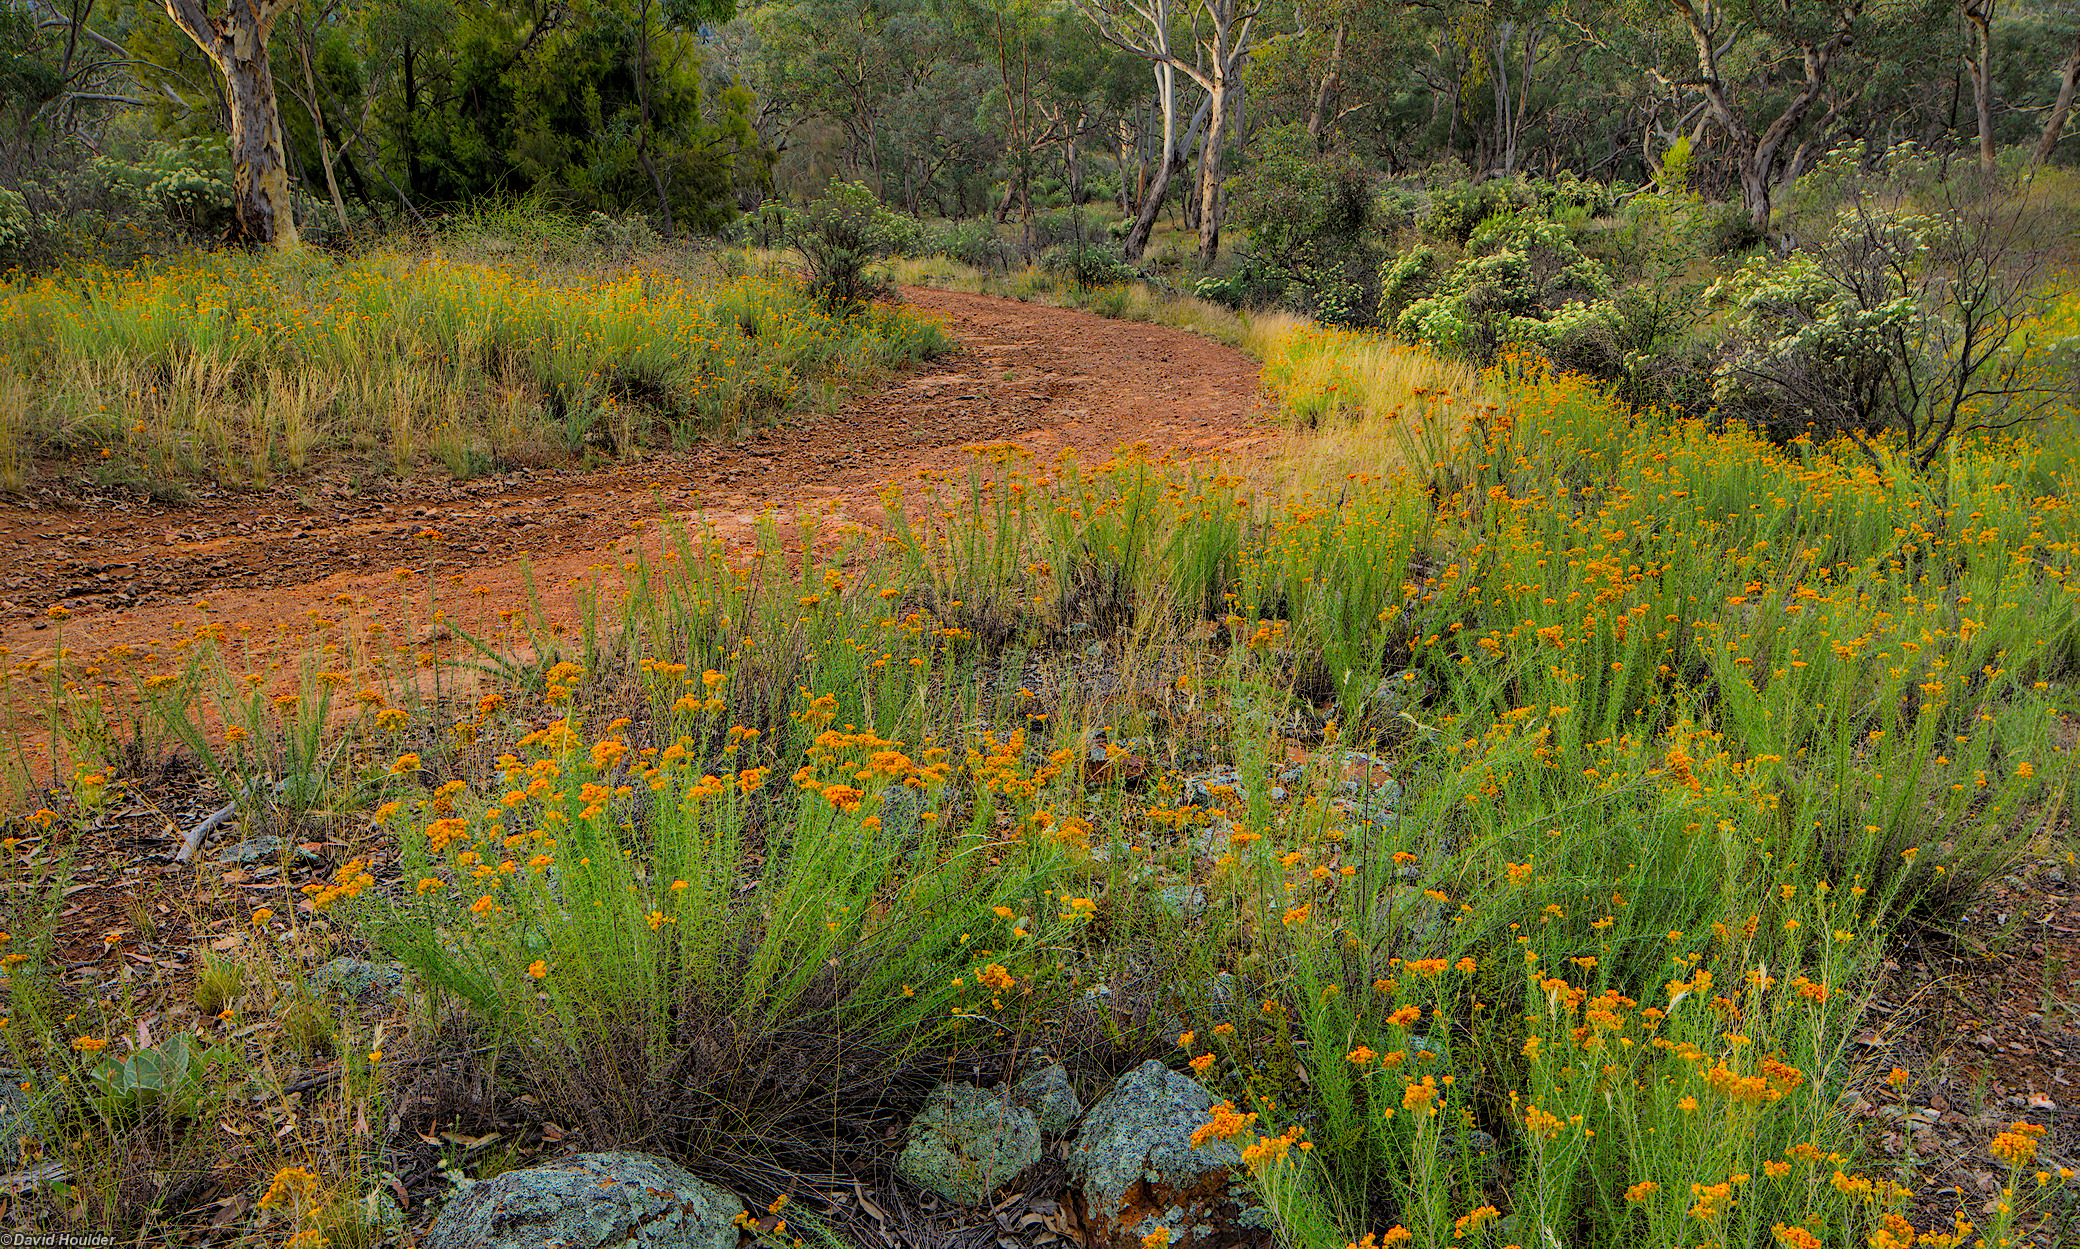 Wildflowers on the Canberra Centenary Trail Mount Ainslie, ACT